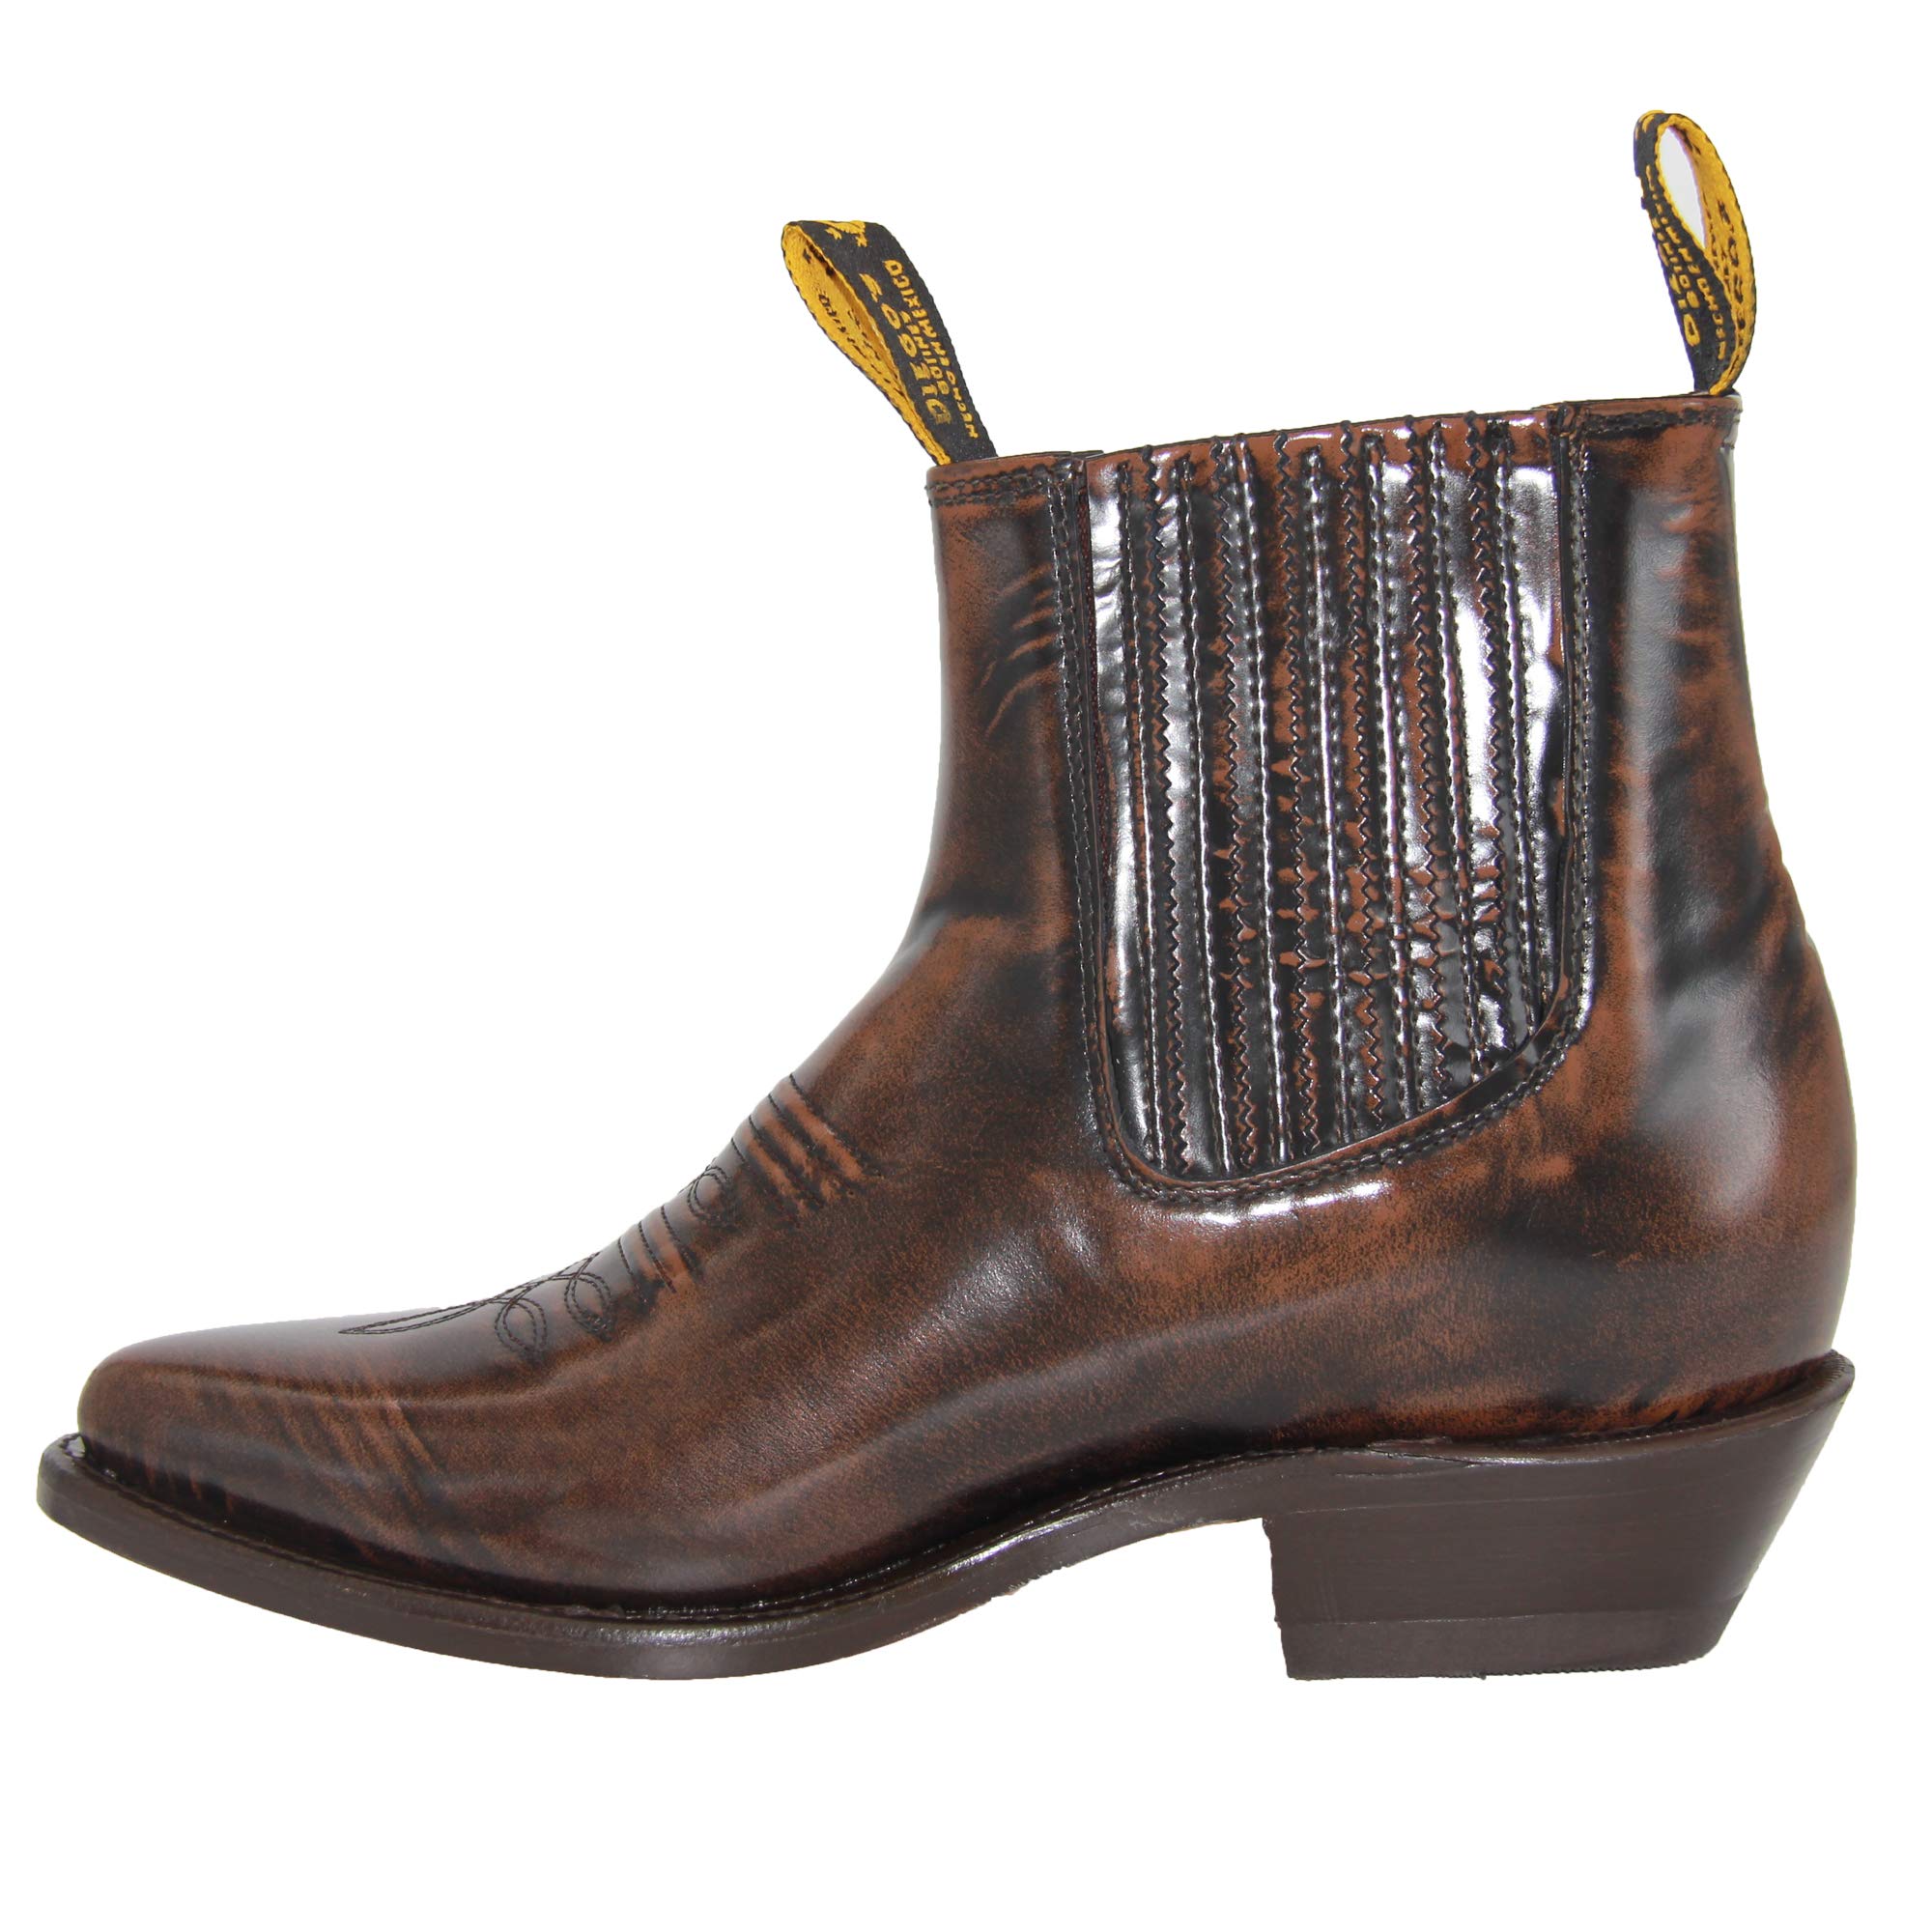 The Western Shops Men's Genuine Leather Short Ankle Cowboy, Charro Botin - image 3 of 5